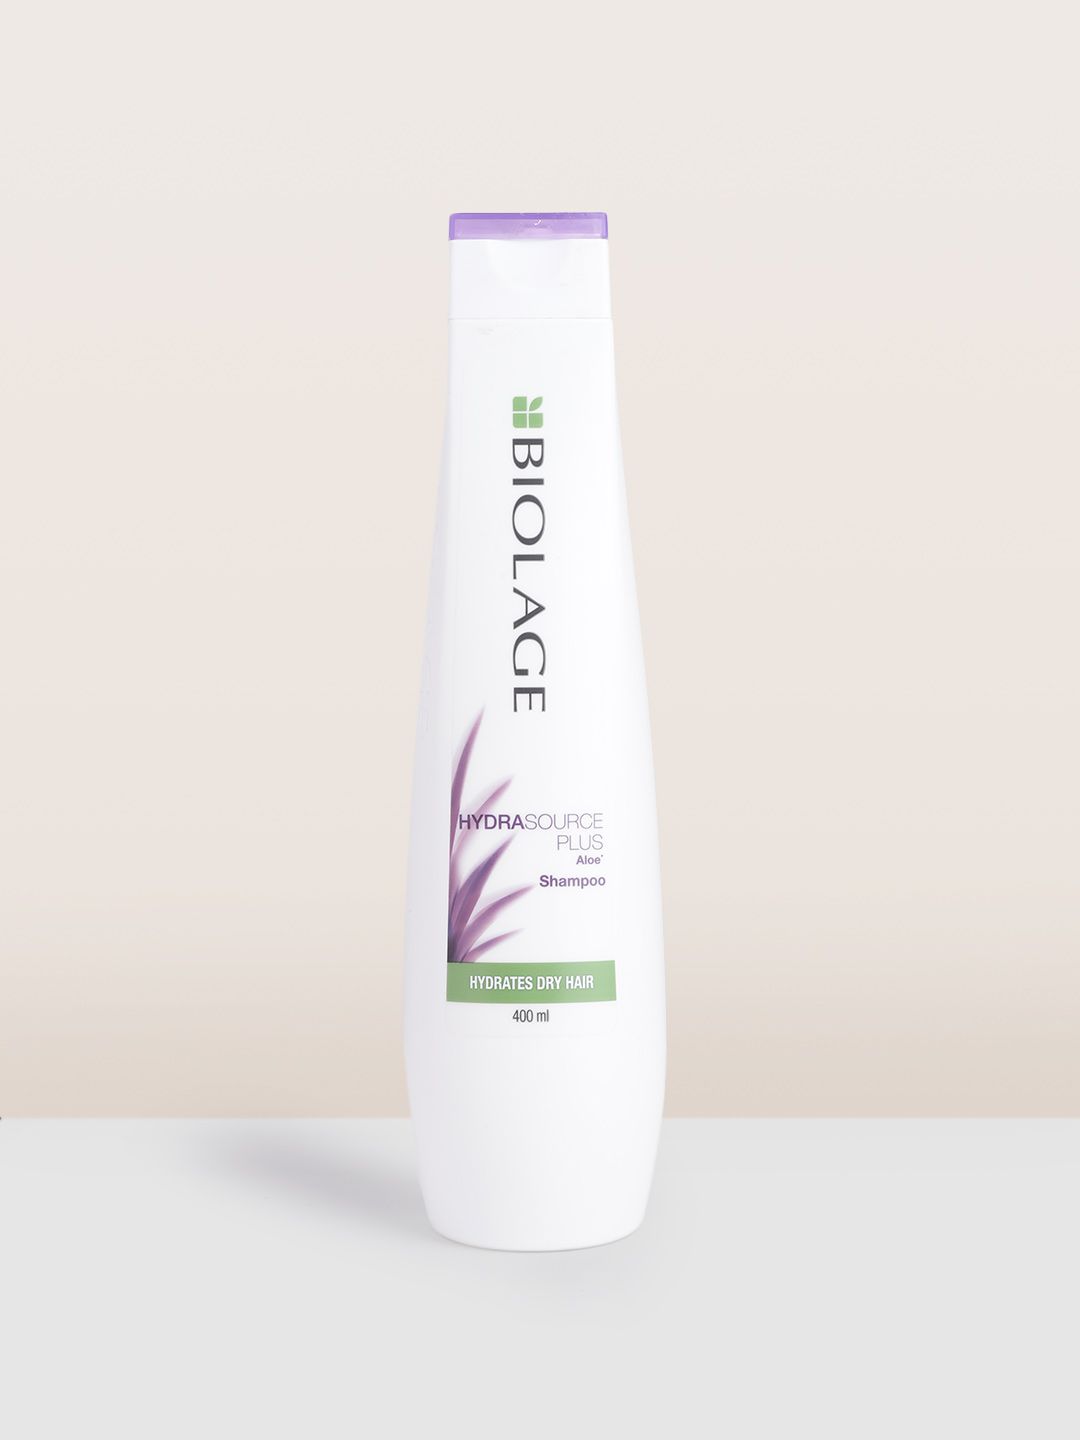 Biolage Hydrasource Plus Aloe Shampoo for Dry Hair - 400 ml Price in India